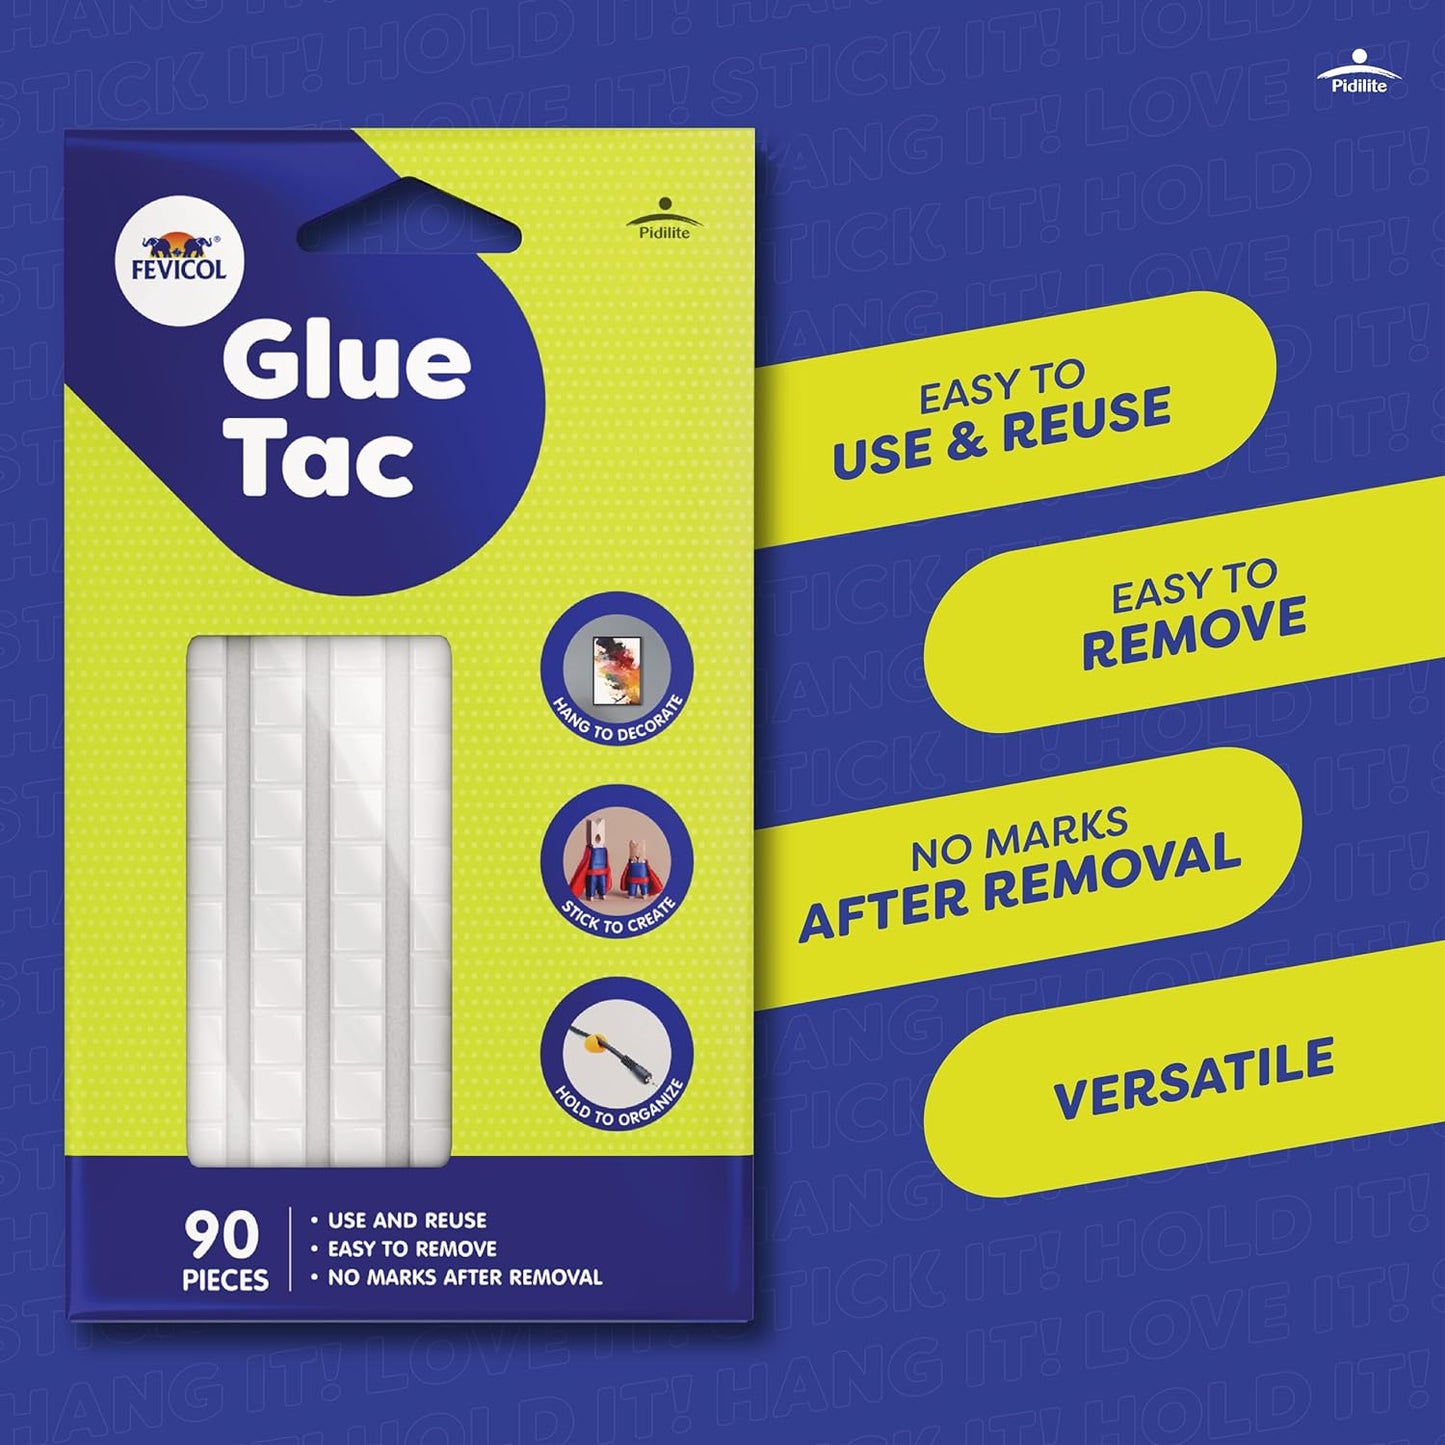 Fevicol Glue Tac 90pcs, 50g - Reusable, Removable, Mouldable Glue | For Decorating, Crafting, Organising | Art & Craft |Easy to Tear | Ideal for Kids, Hobbyists, School